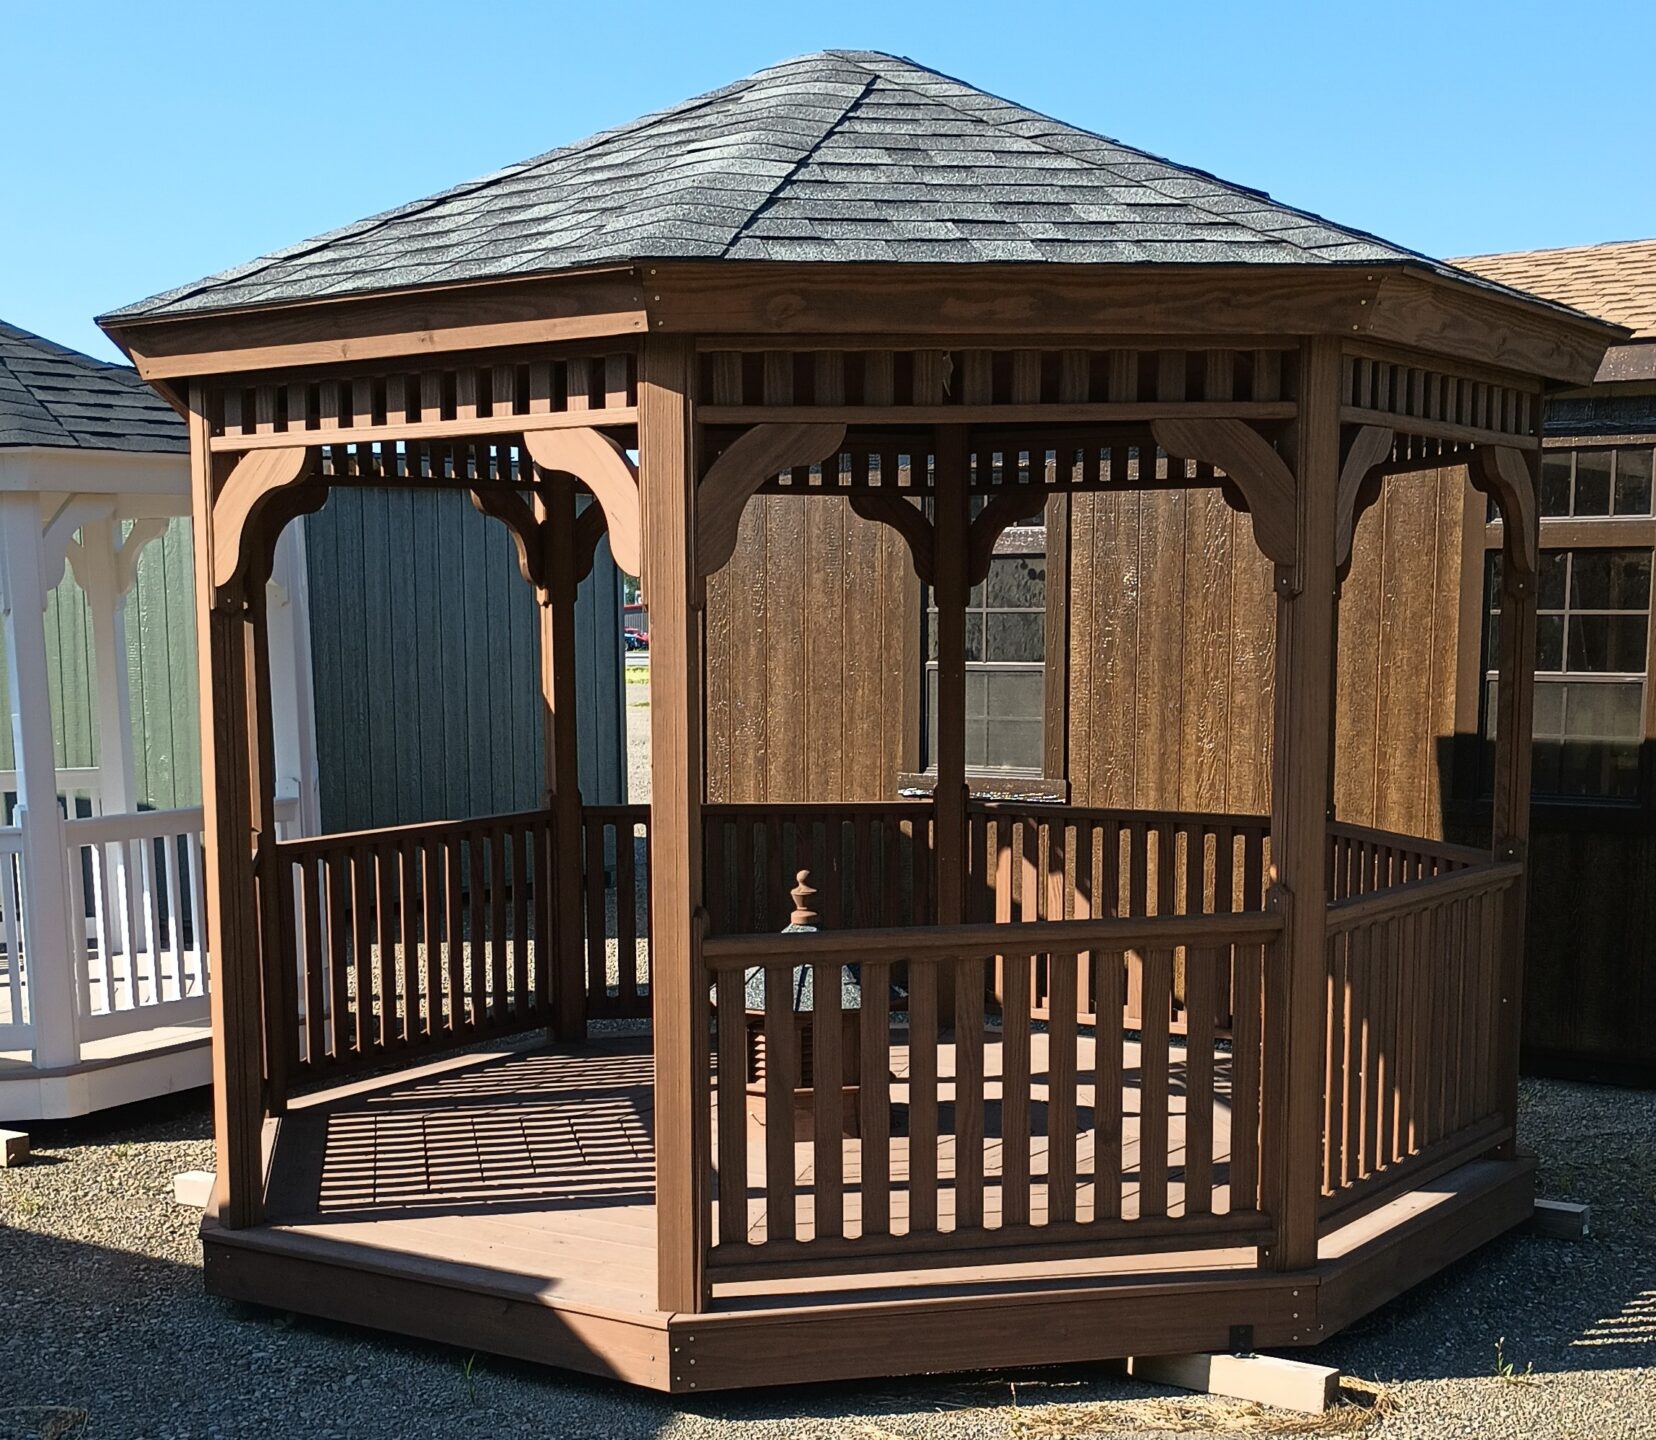 Wooden Gazebo with railings and cupola